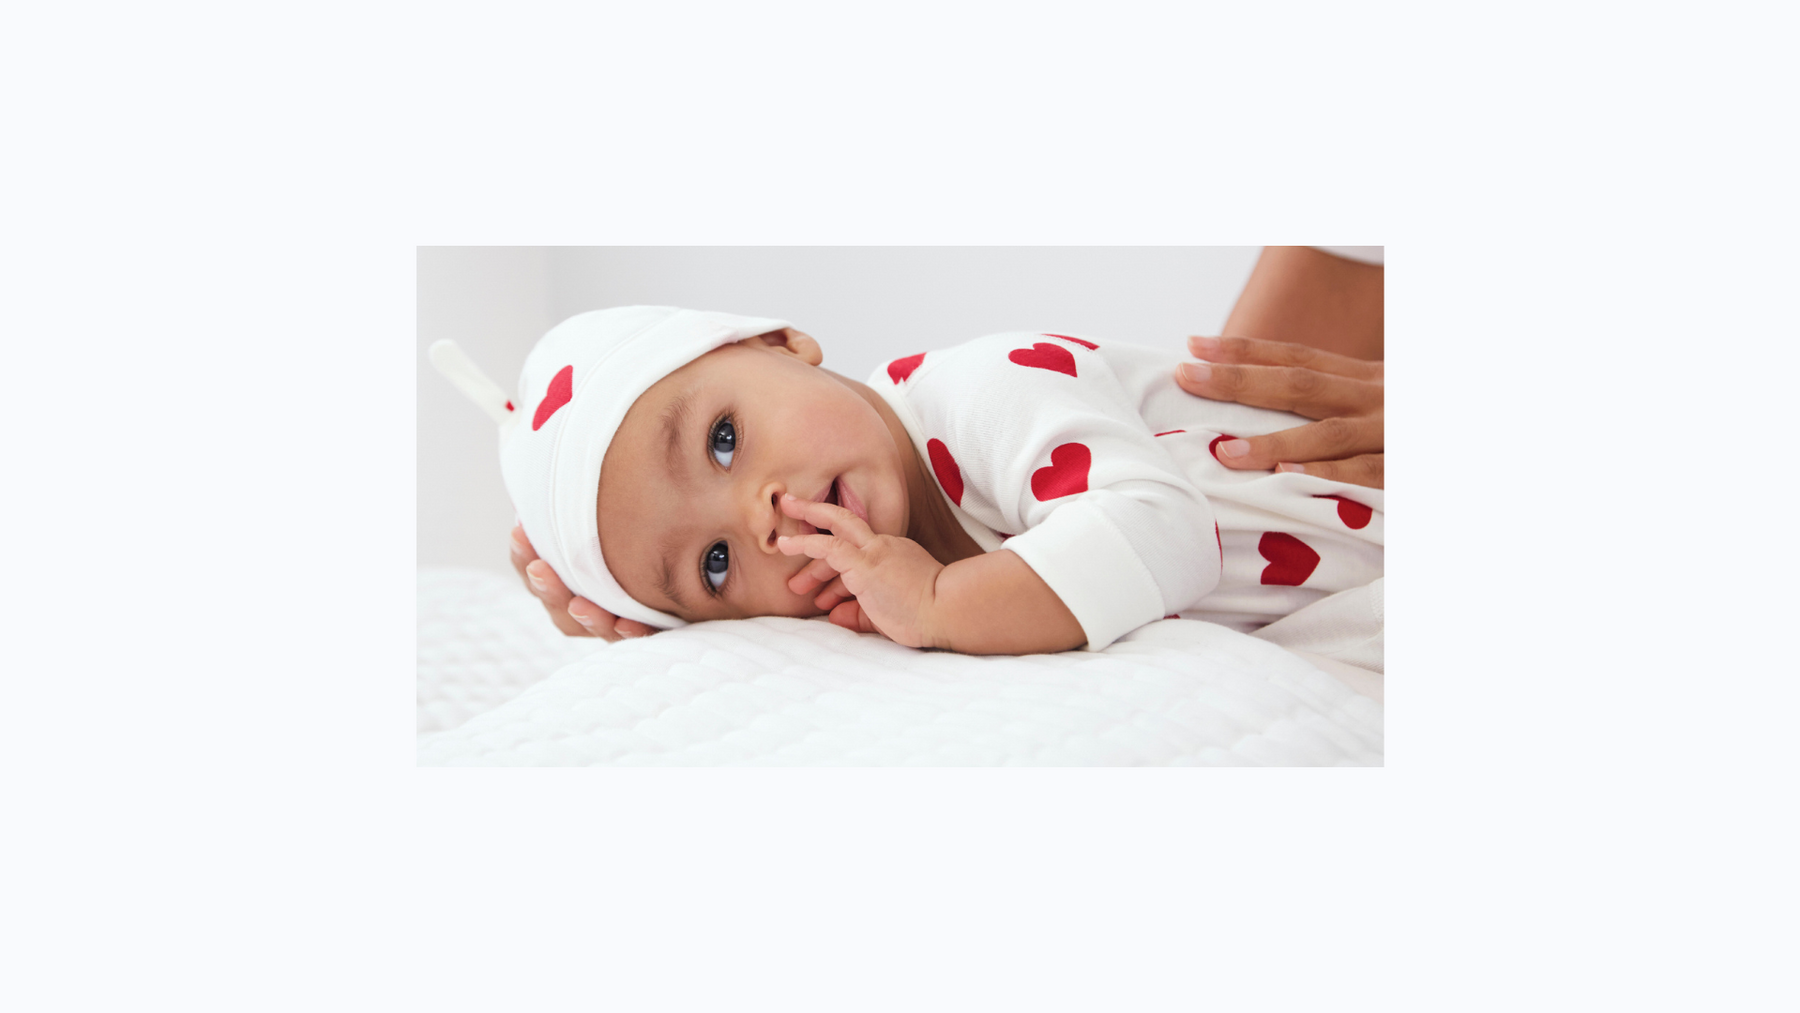 First weeks with baby: 8 tips for caring for your newborn